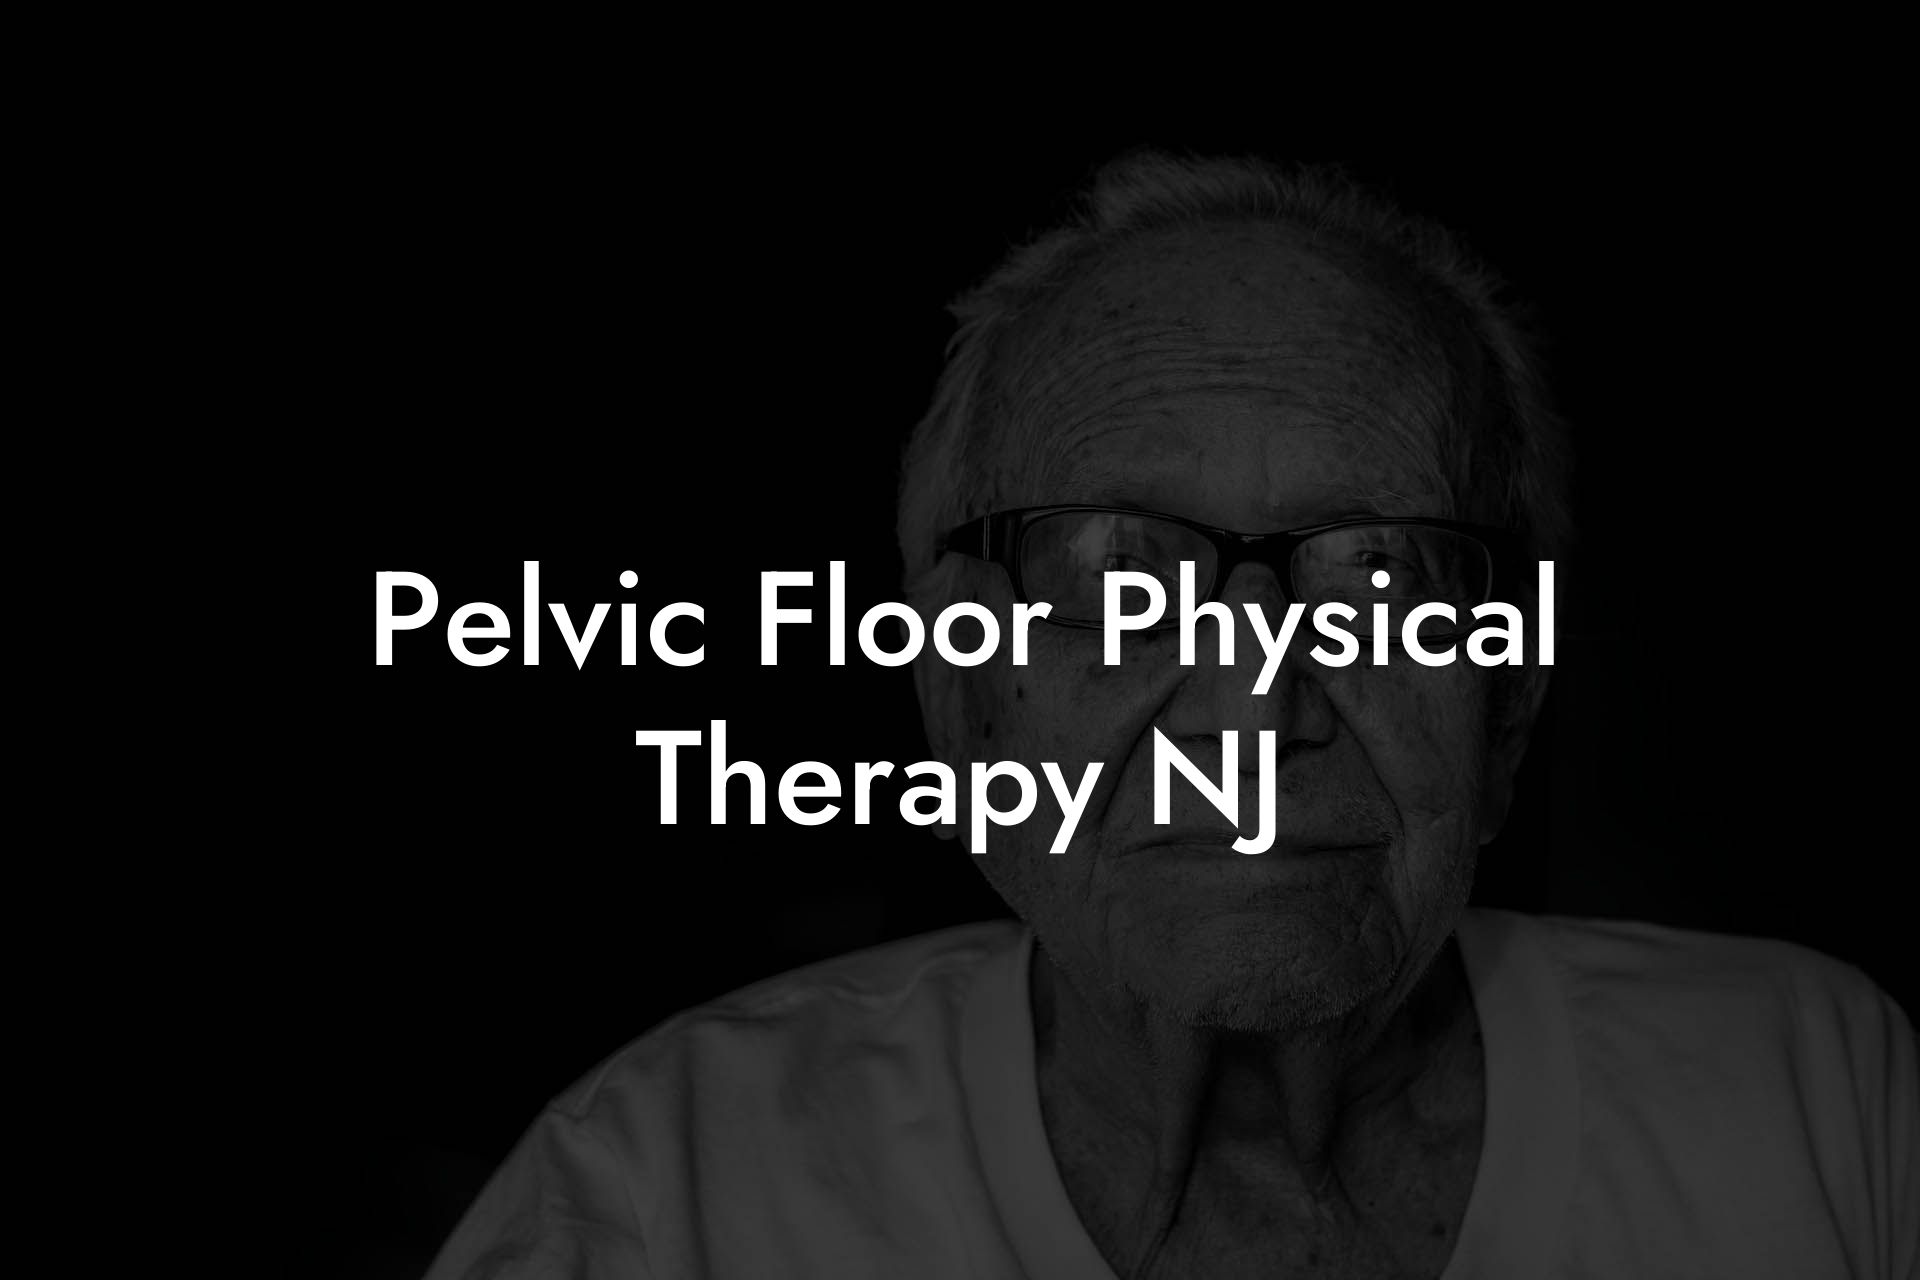 Pelvic Floor Physical Therapy NJ